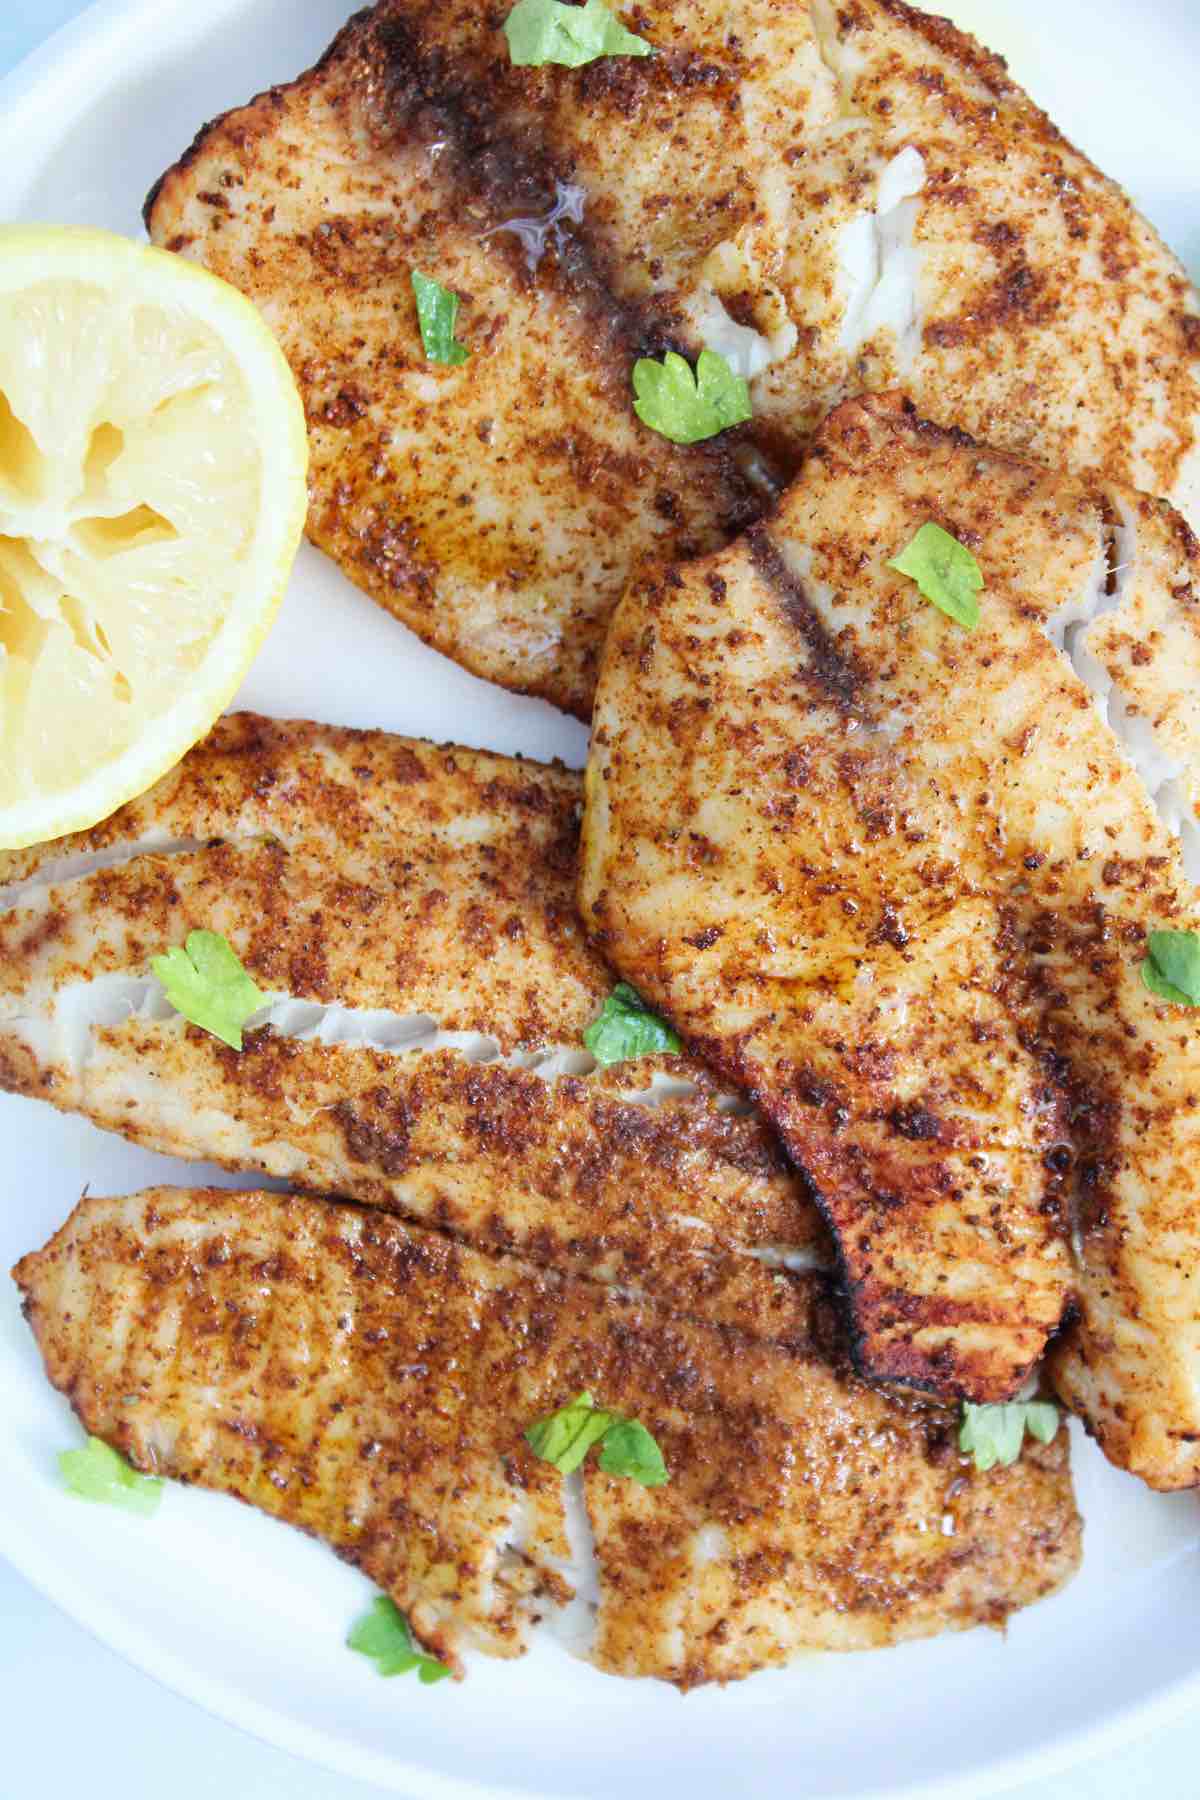 This recipe for air fryer blackened tilapia fish fillets is made with only 3 ingredients.